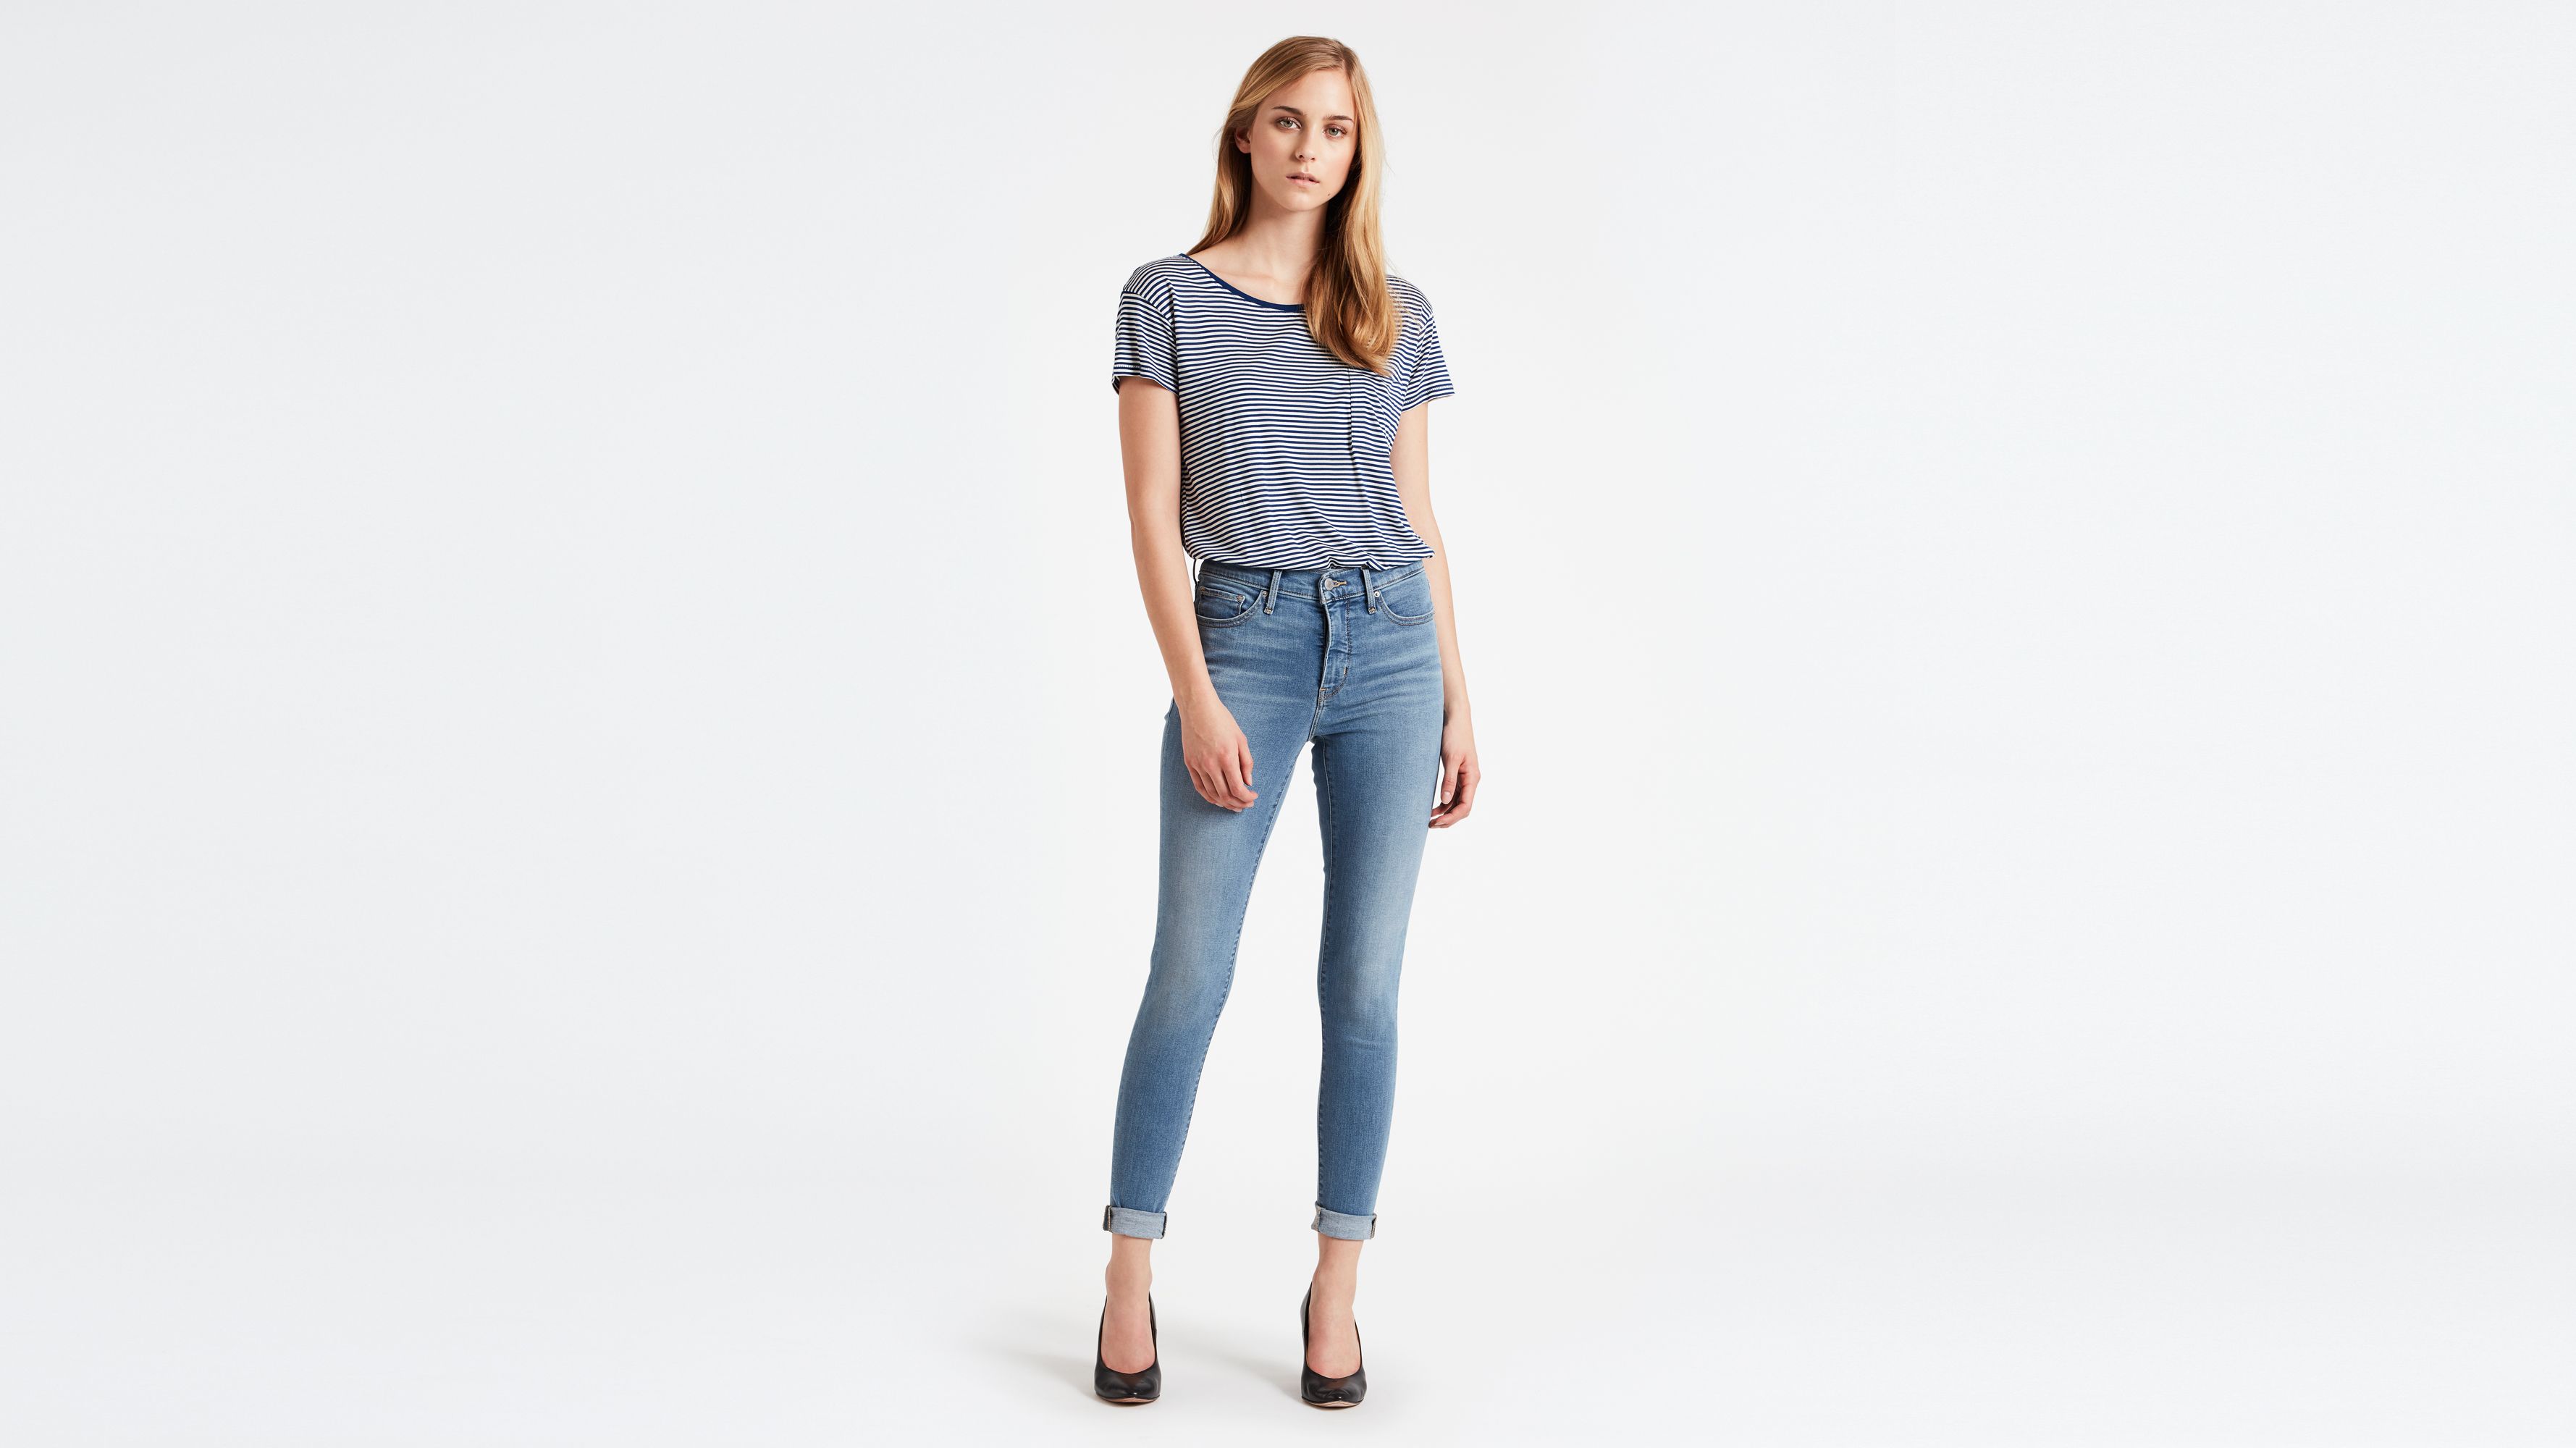 levi's shaping super skinny jeans